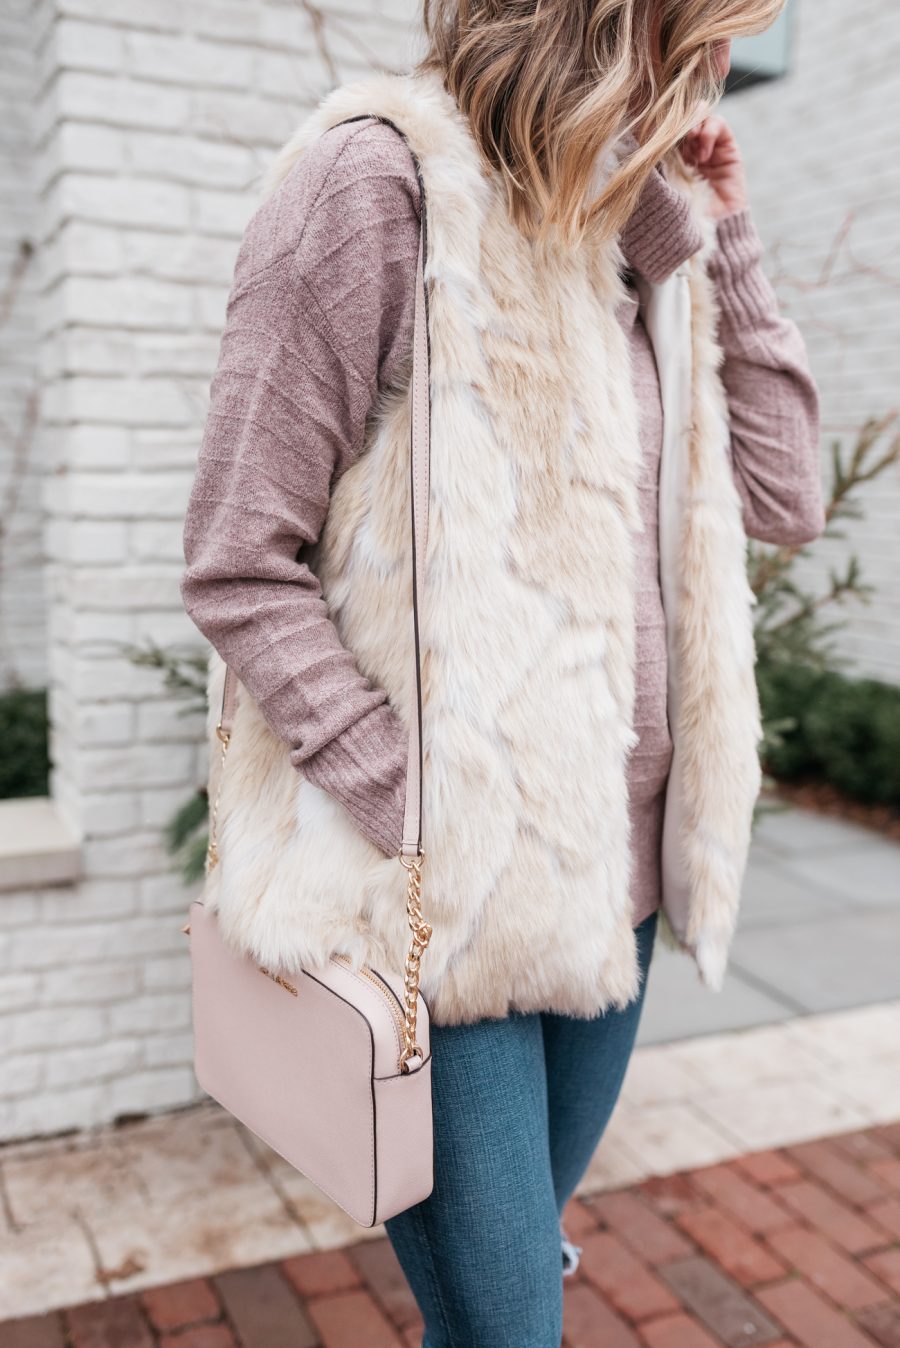 pink turtleneck, faux fur vest, skinny jeans, crossbody, and booties